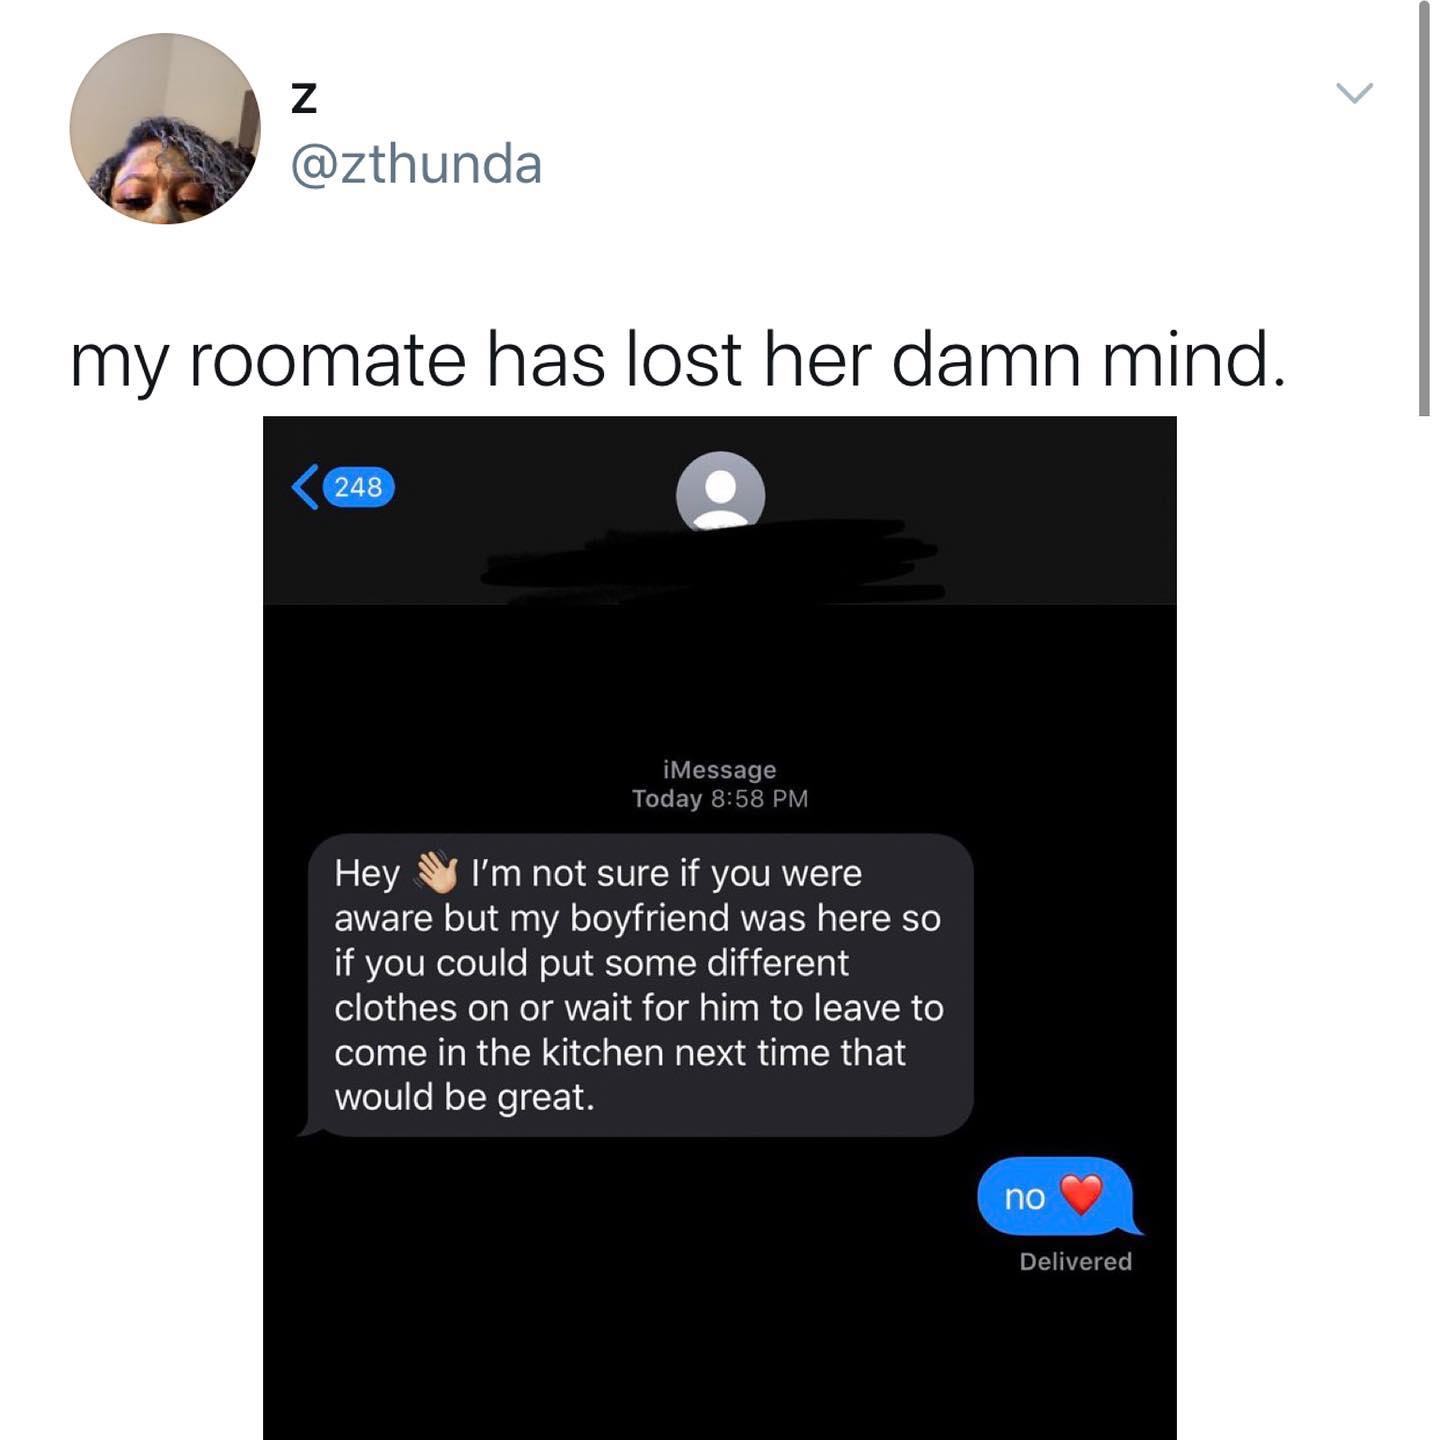 dank memes - twitter - Clothing - Z my roomate has lost her damn mind. 248 iMessage Today Hey I'm not sure if you were aware but my boyfriend was here so if you could put some different clothes on or wait for him to leave to come in the kitchen next time 